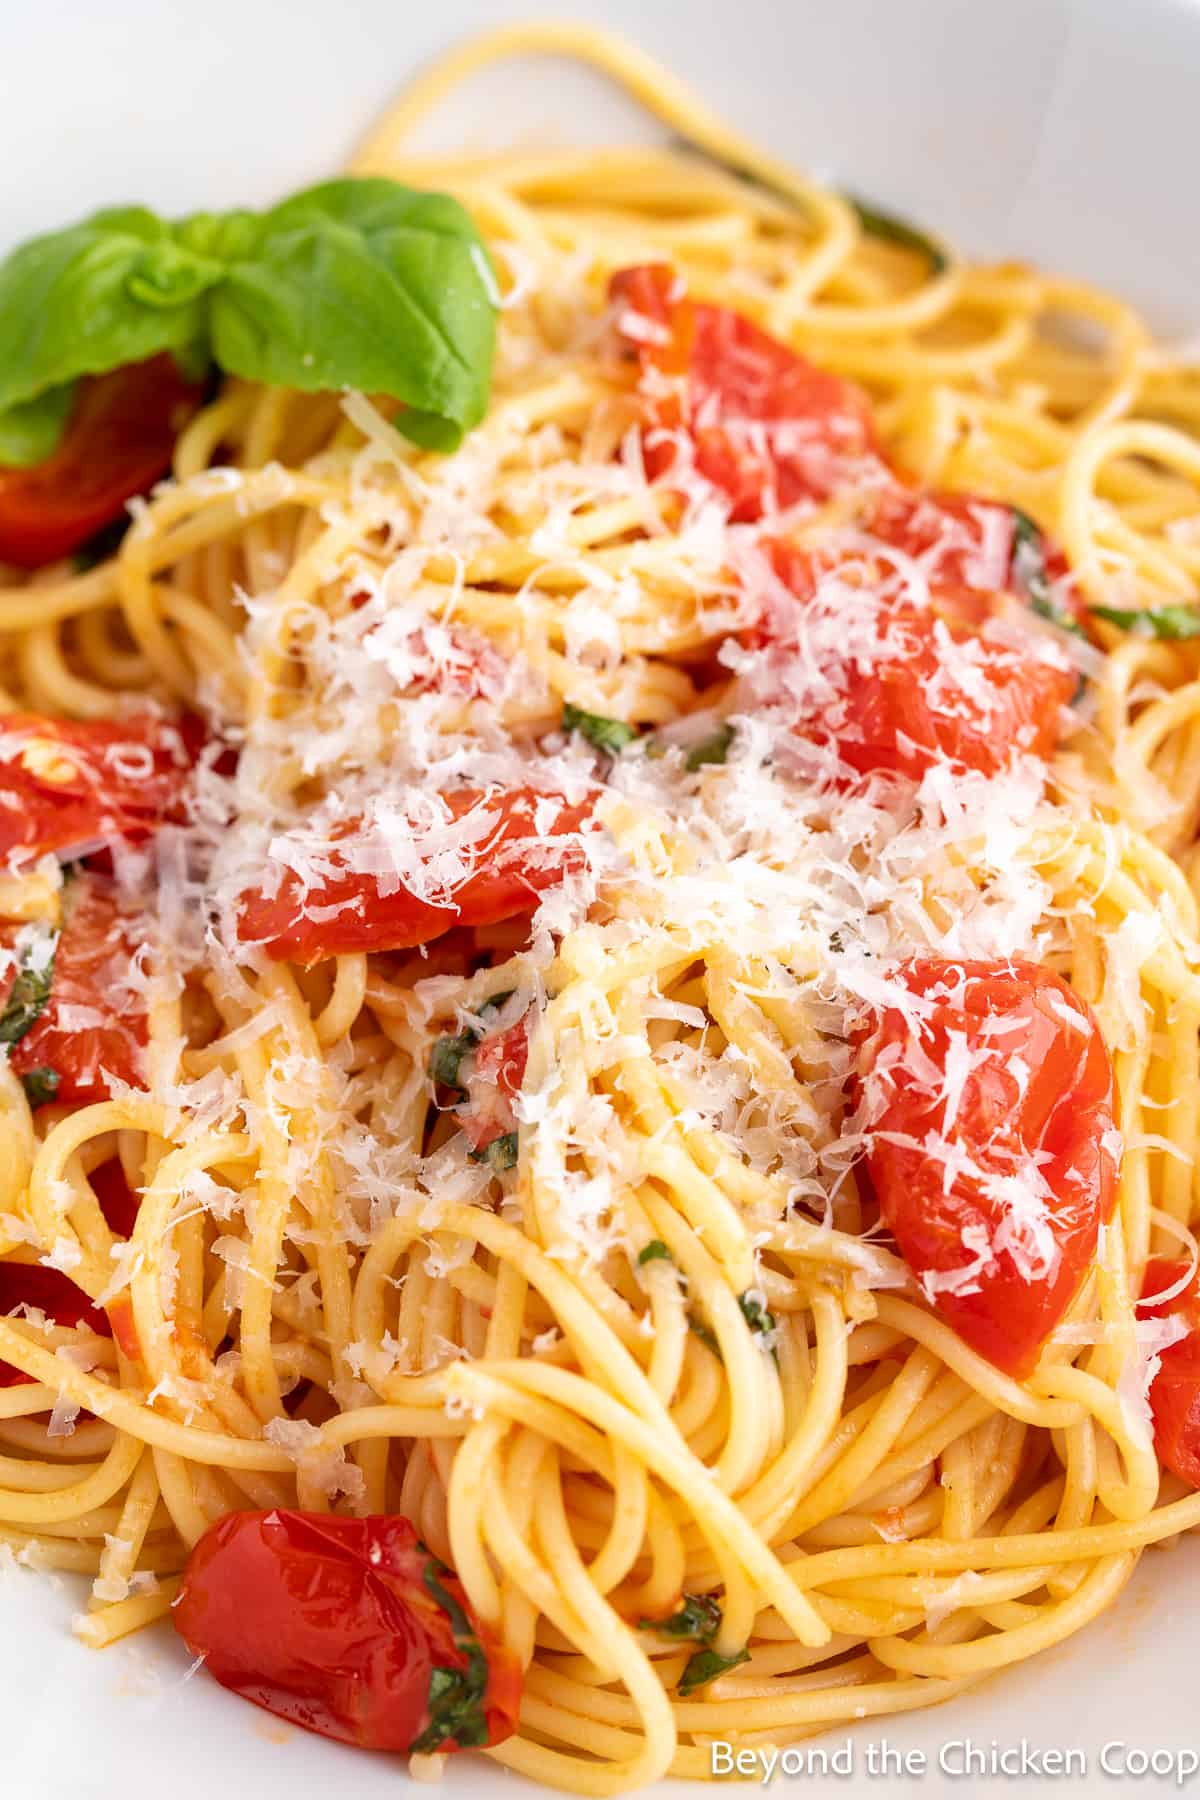 Spaghetti noodles with cherry tomatoes and parmesan.